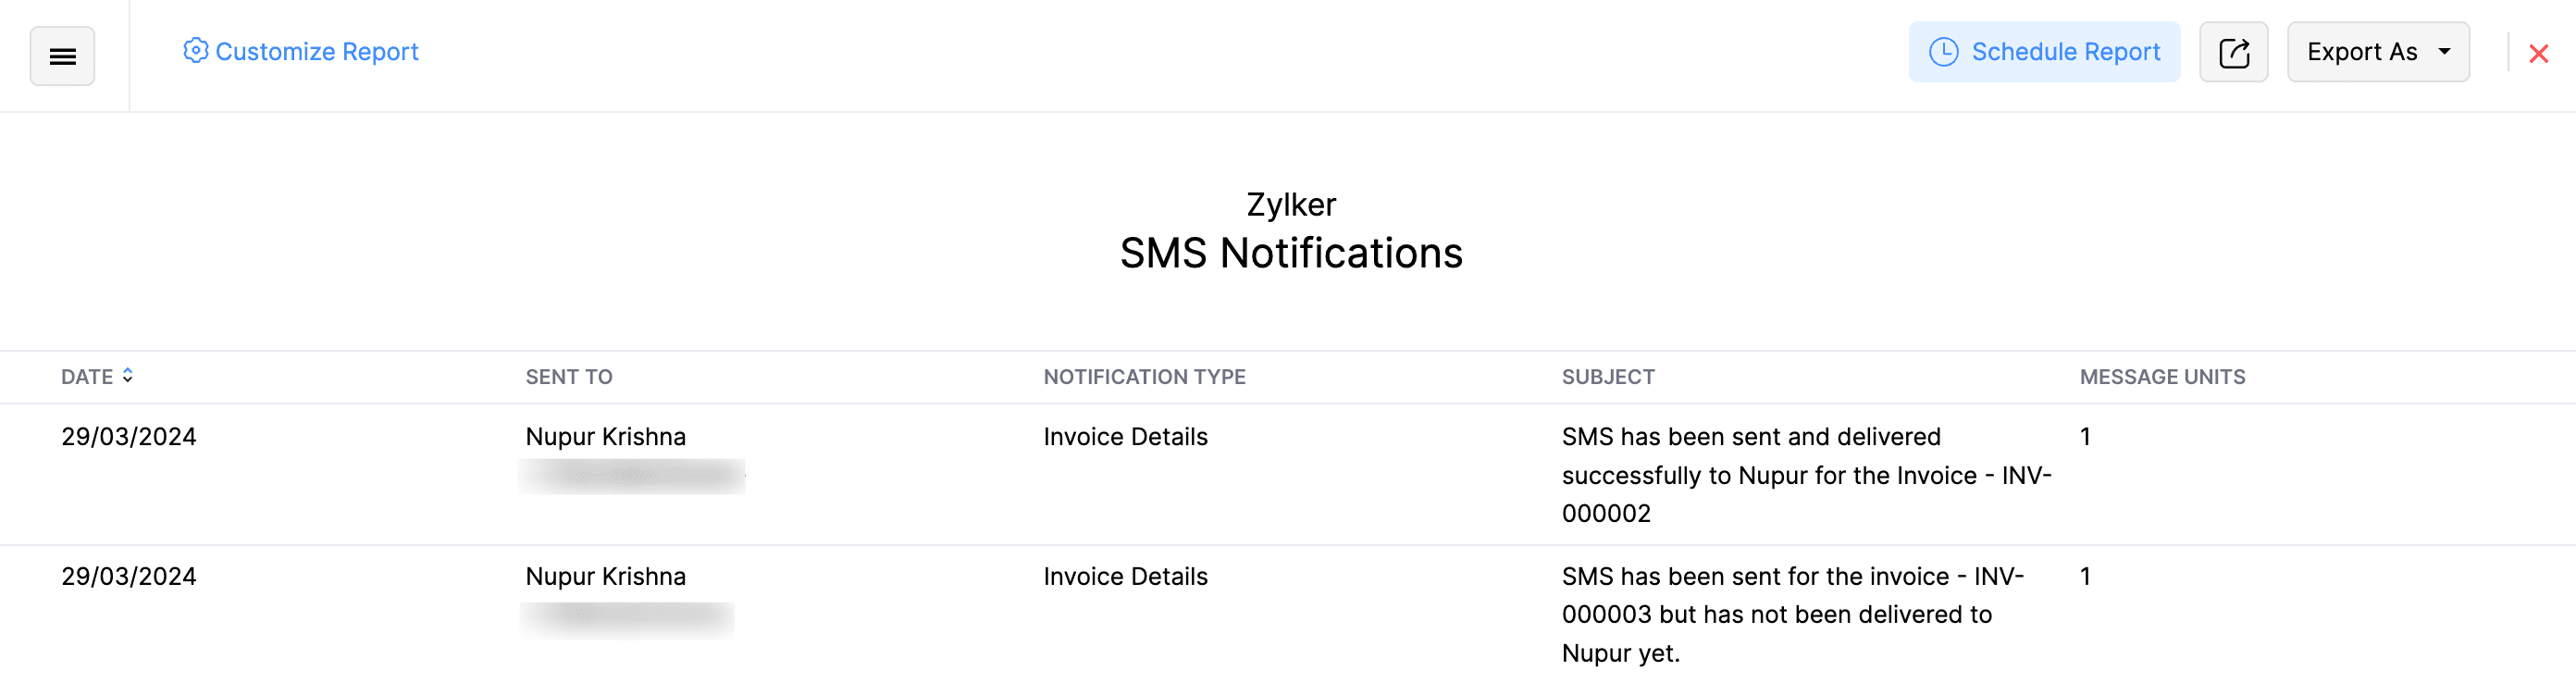 SMS Notifications Report